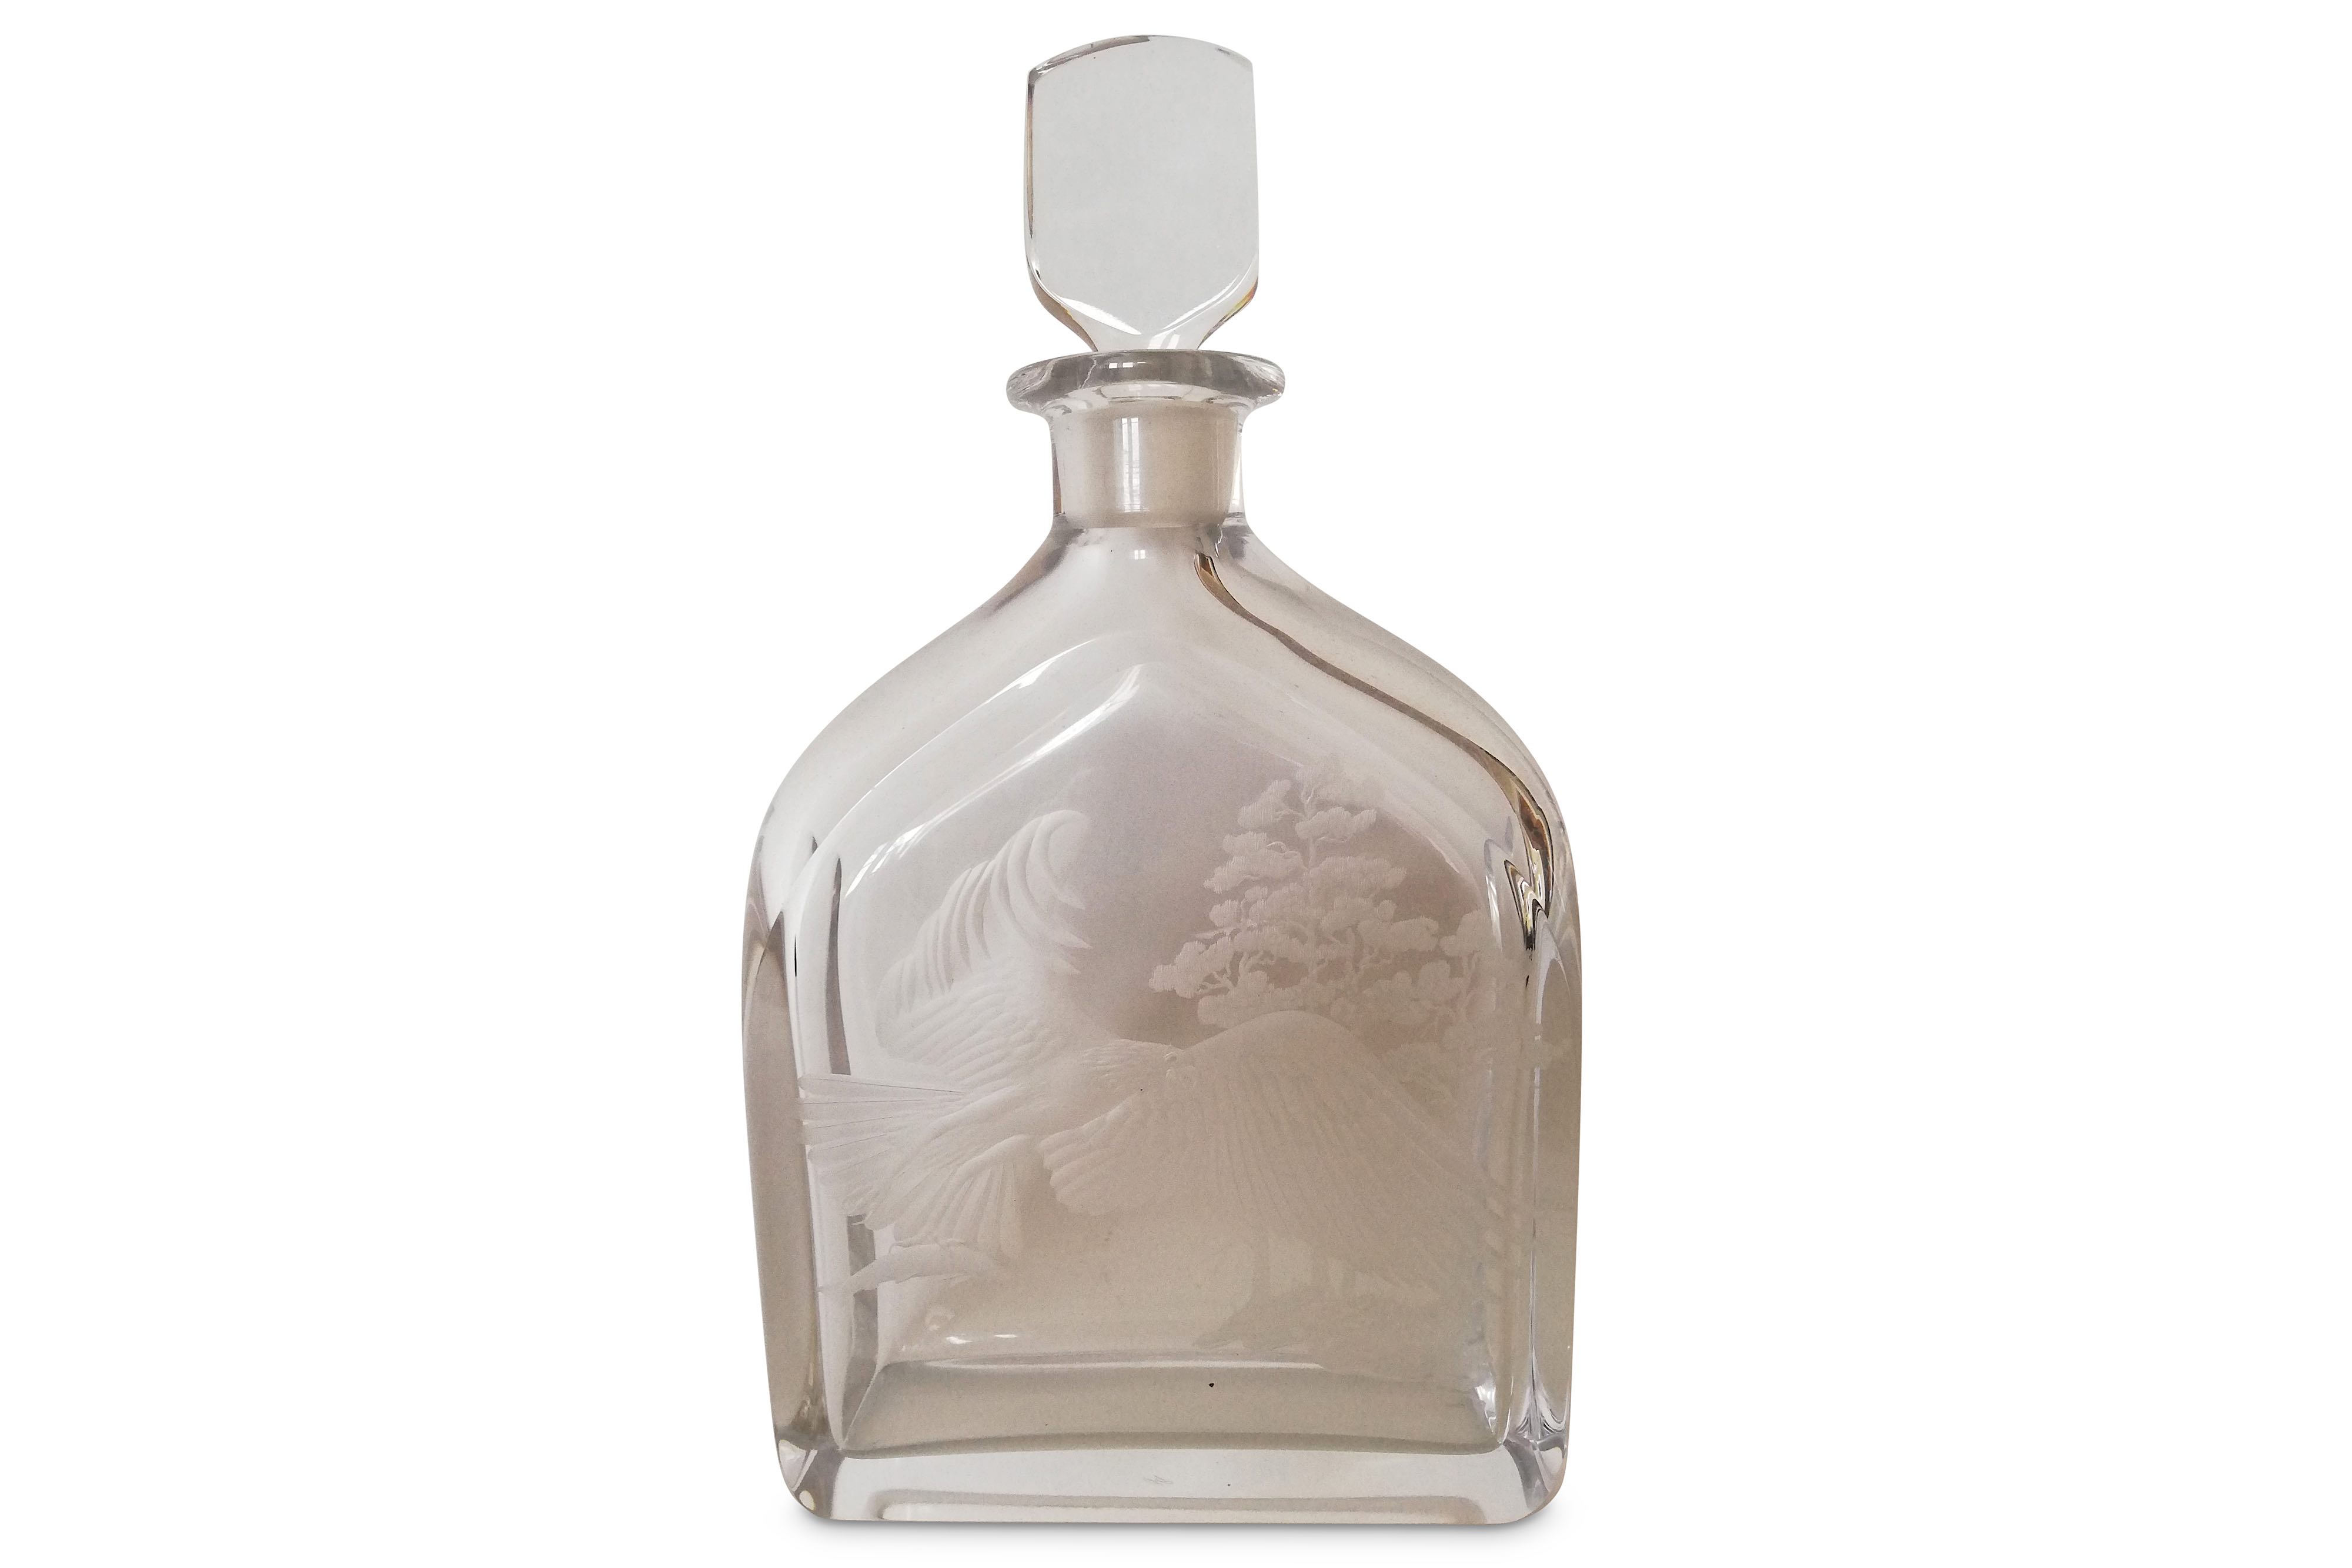 ORREFORS: An etched glass Eagle Decanter and Stopper - Image 2 of 4